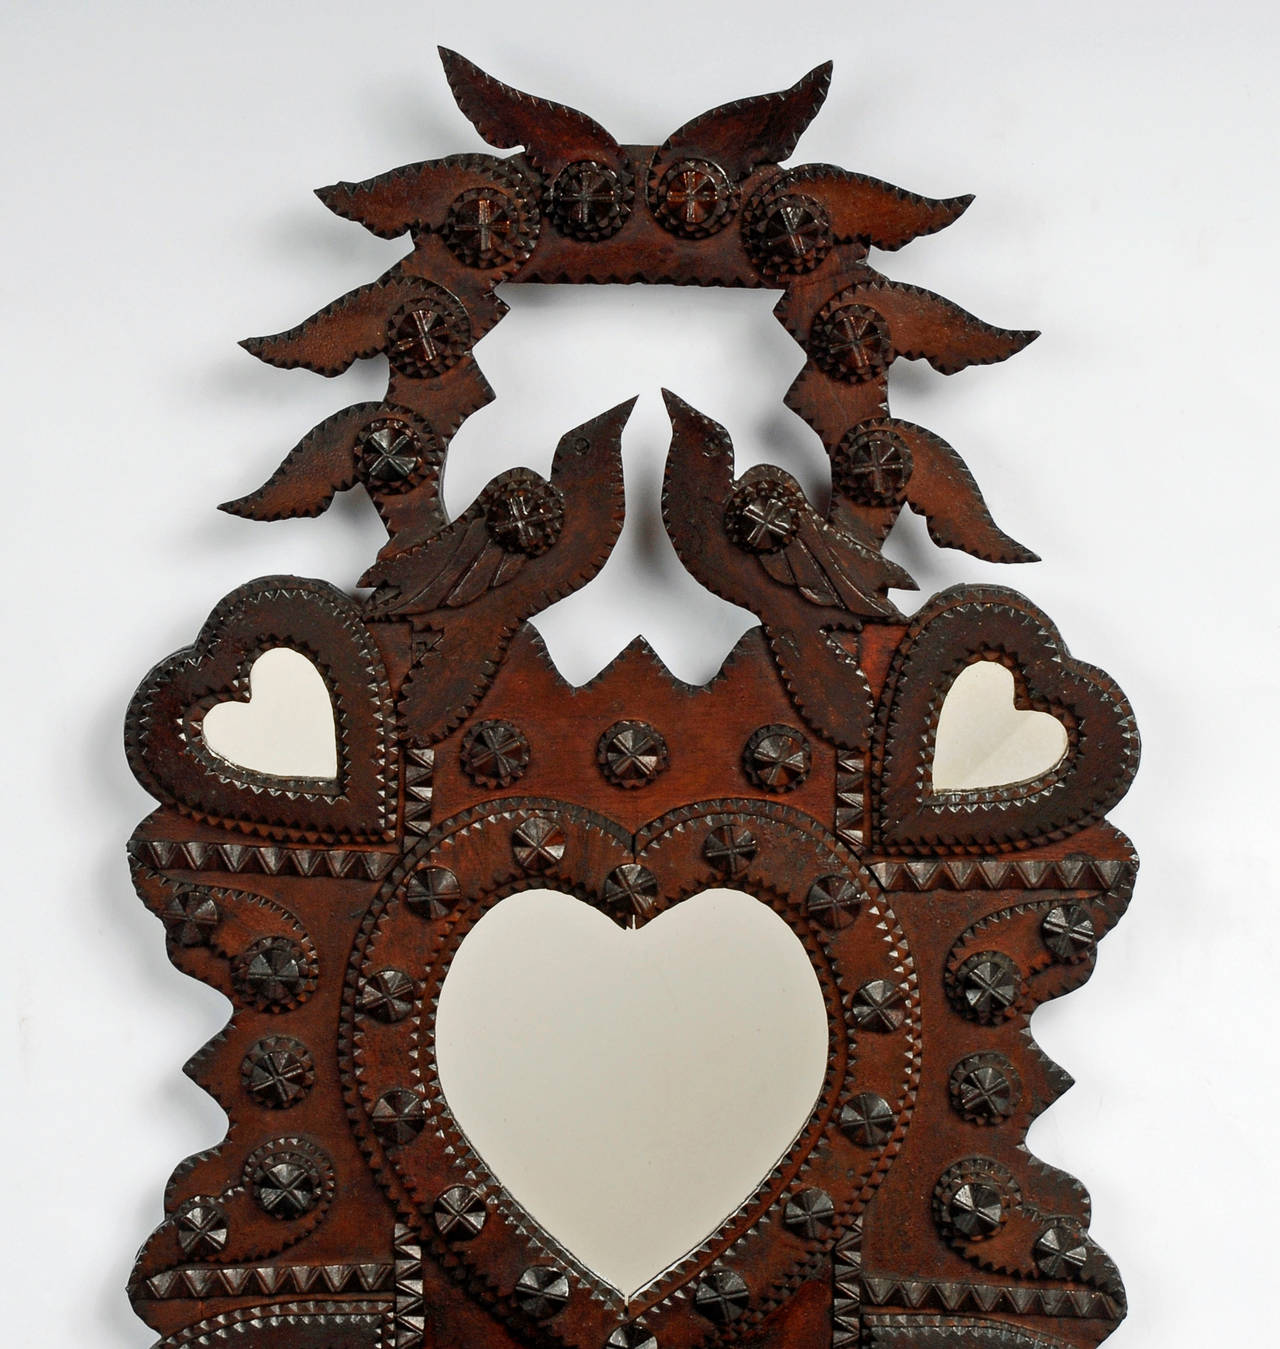 A masterful Tramp Art 'Winged' wall sculpture by John Zadzora. It features his signature styled five heart-shaped mirrors, two drawers and a small compartment. He further embellished his artful wall sculpture with birds, wings and in this rare